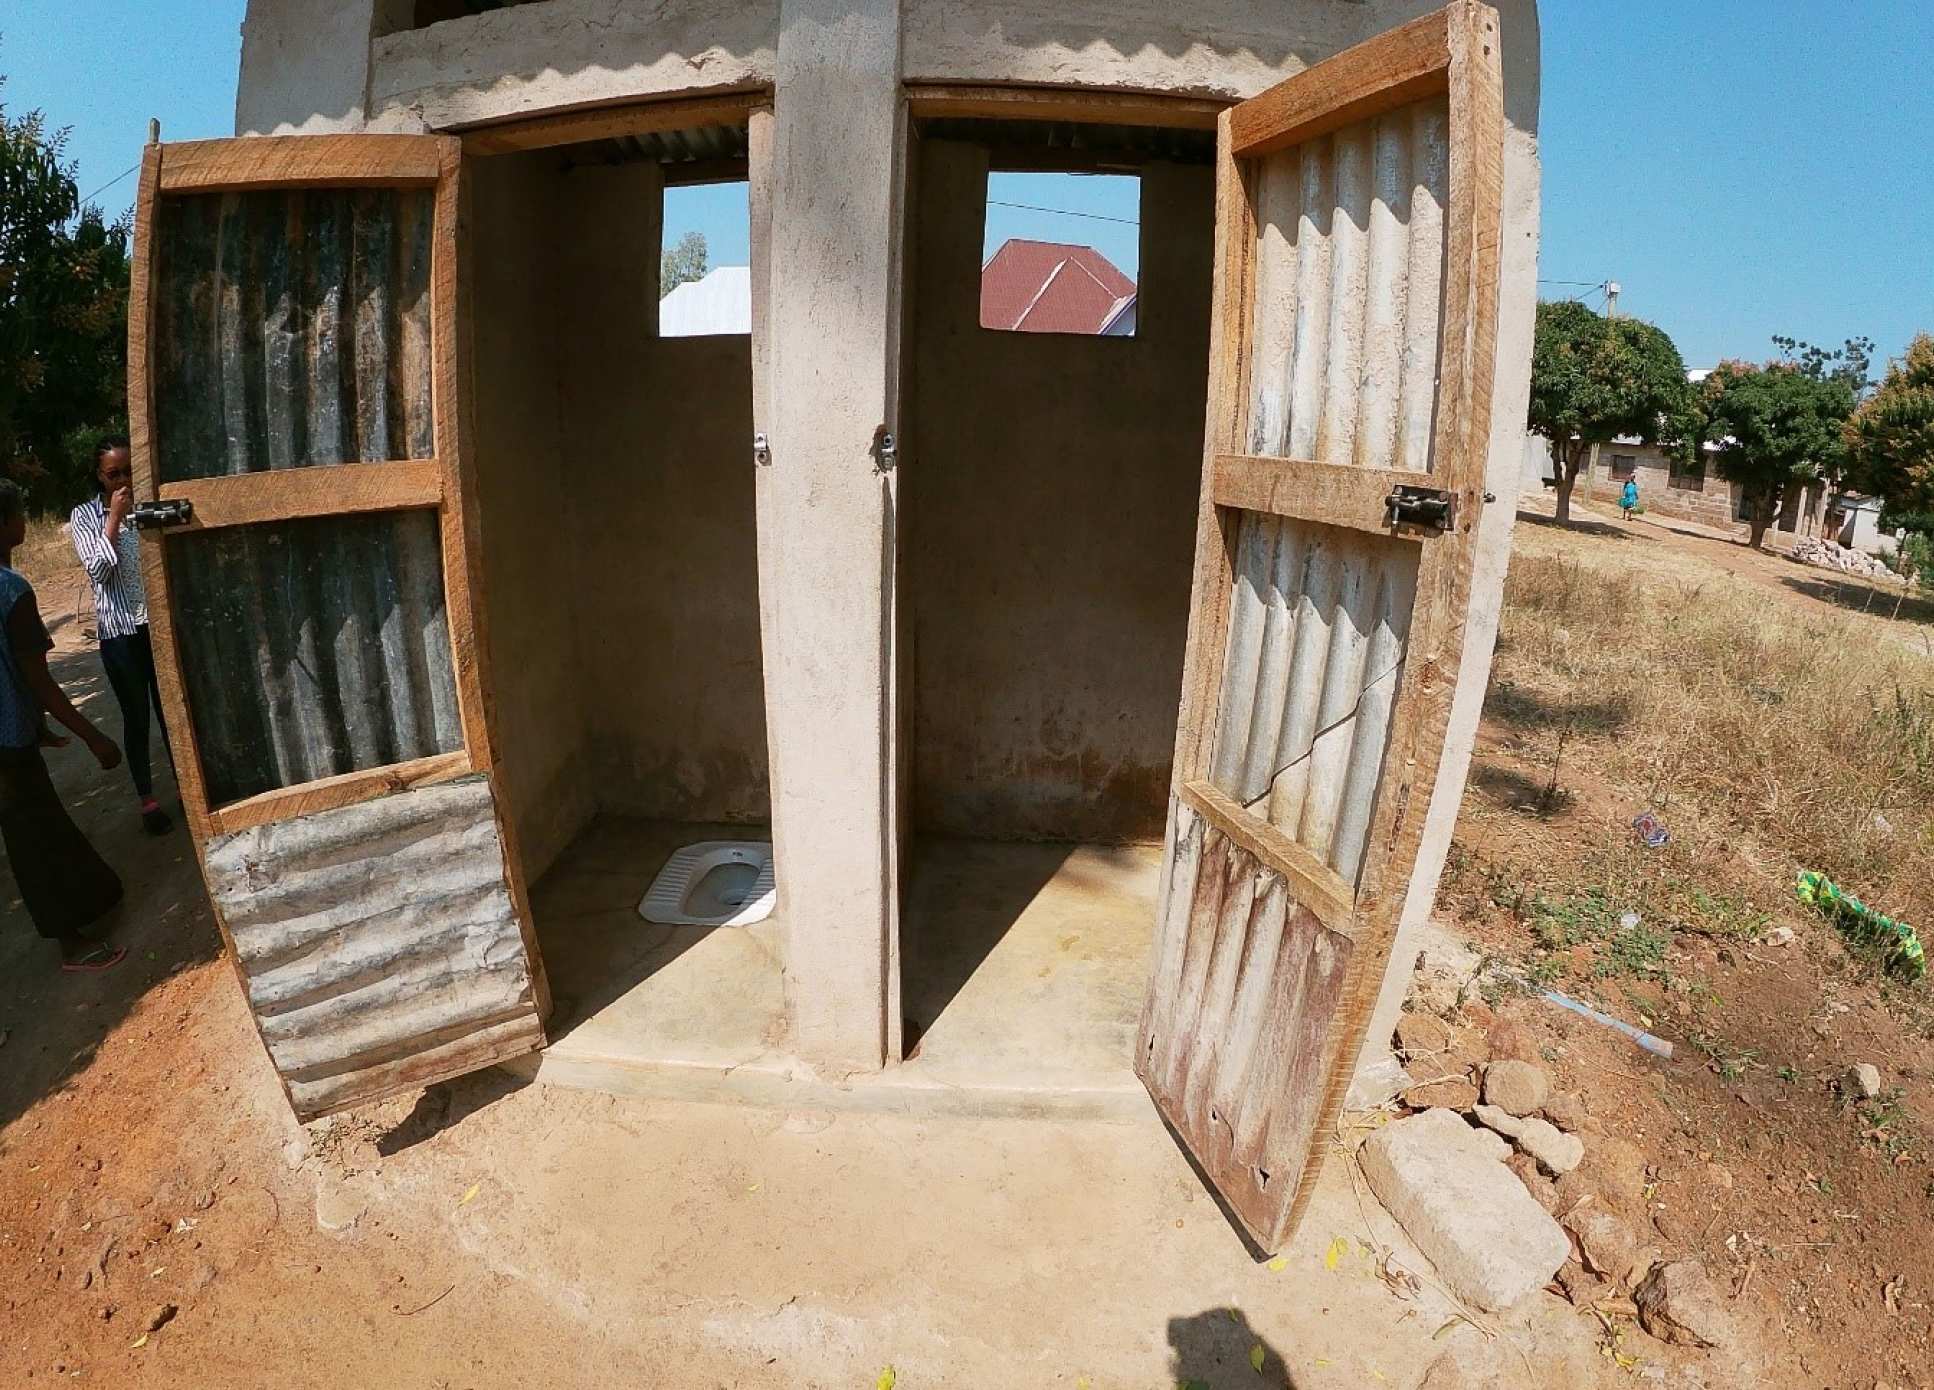 A brand-new toilet in Tanzania, built to government guidelines